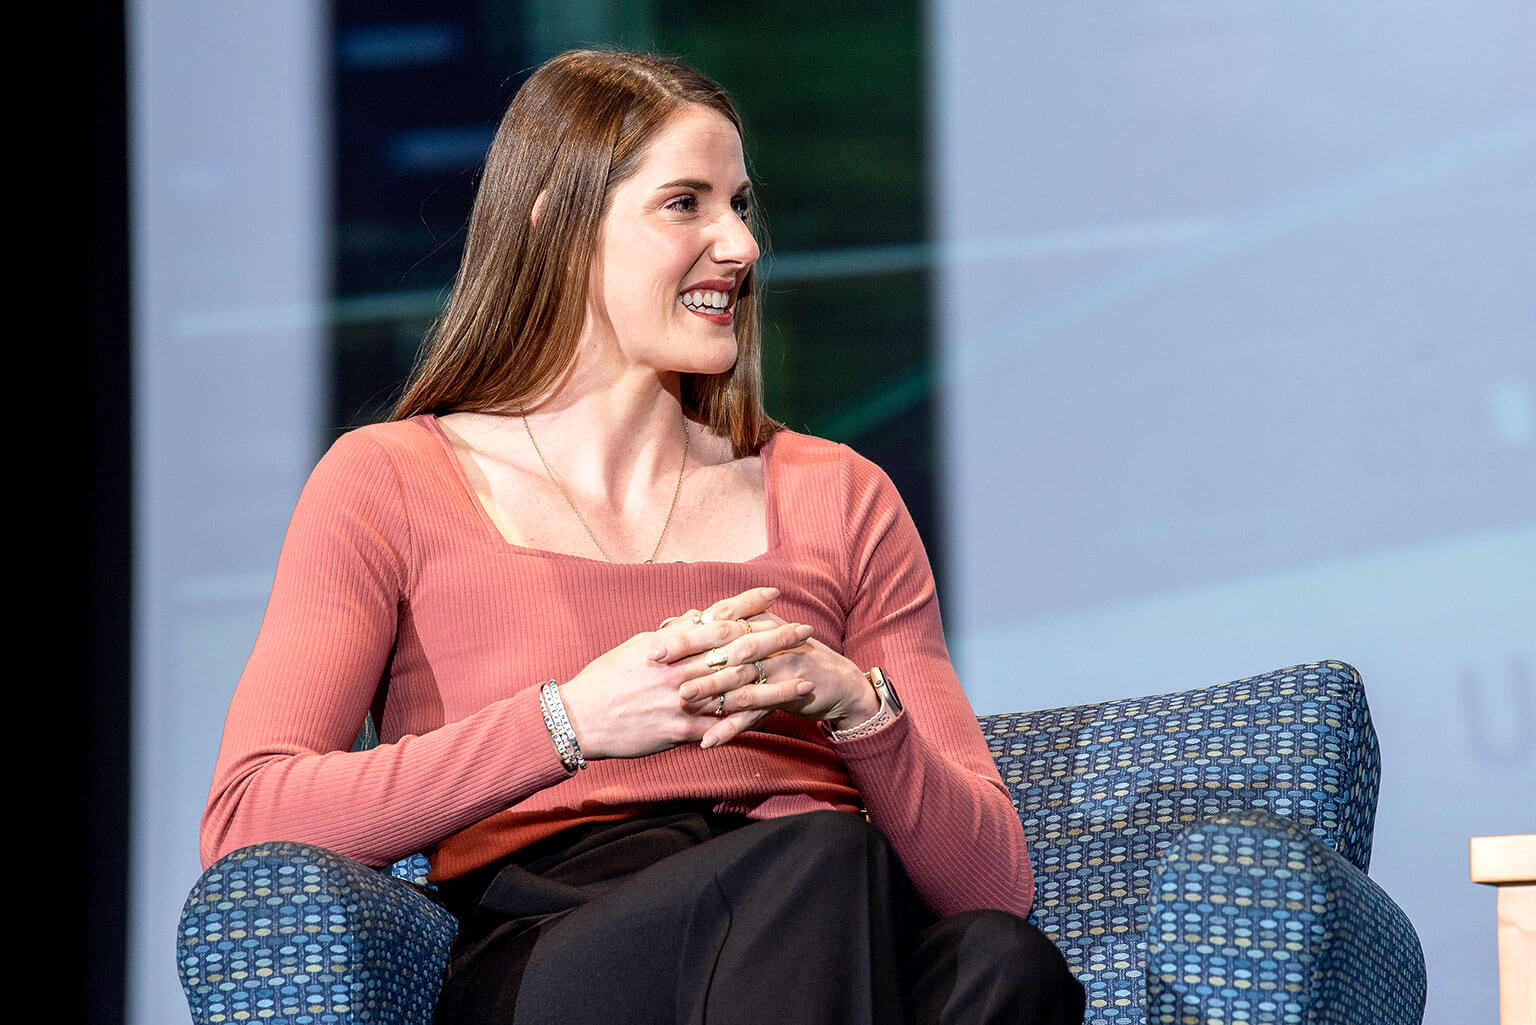 Five-time U.S. Olympic swimming gold medalist Missy Franklin speaks at the National Character and Leadership Symposium.